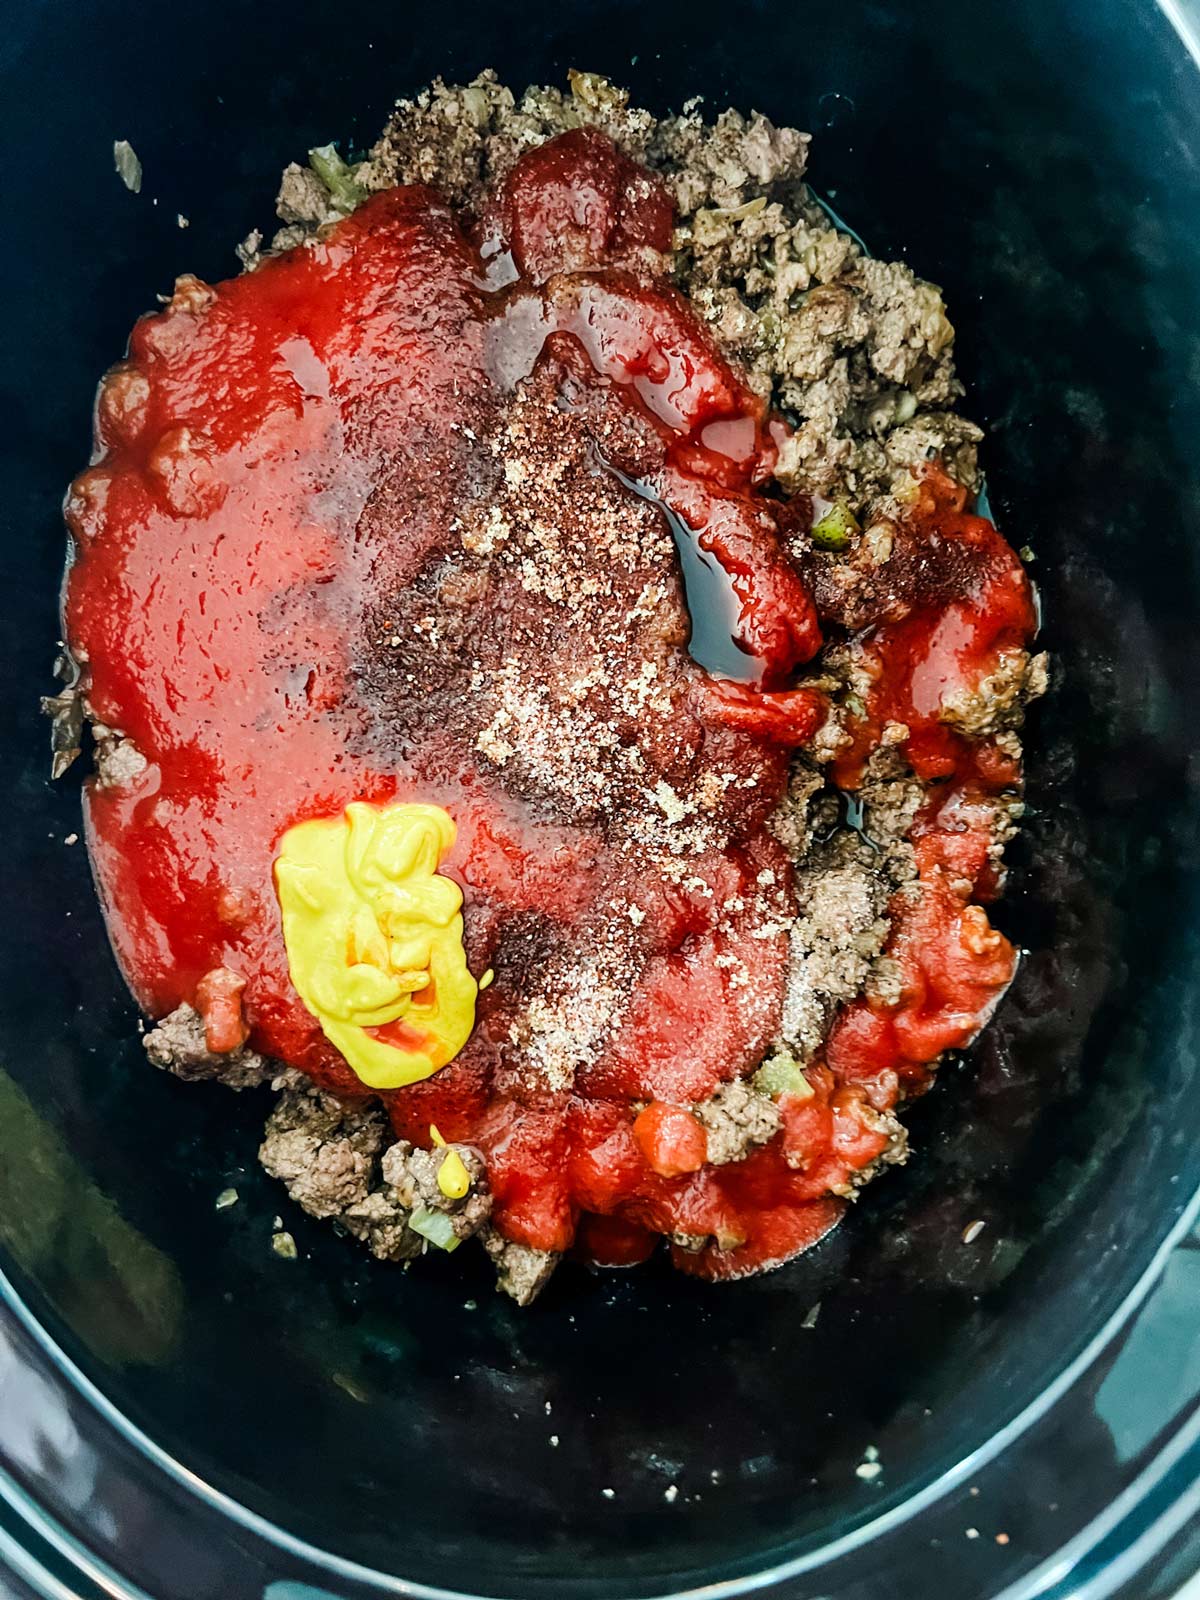 Ketchup, tomato sauce, Worcestershire, vinegar, mustard, sugar, chili powder and salt on top of ground beef, onion, and celery in a slow cooker.